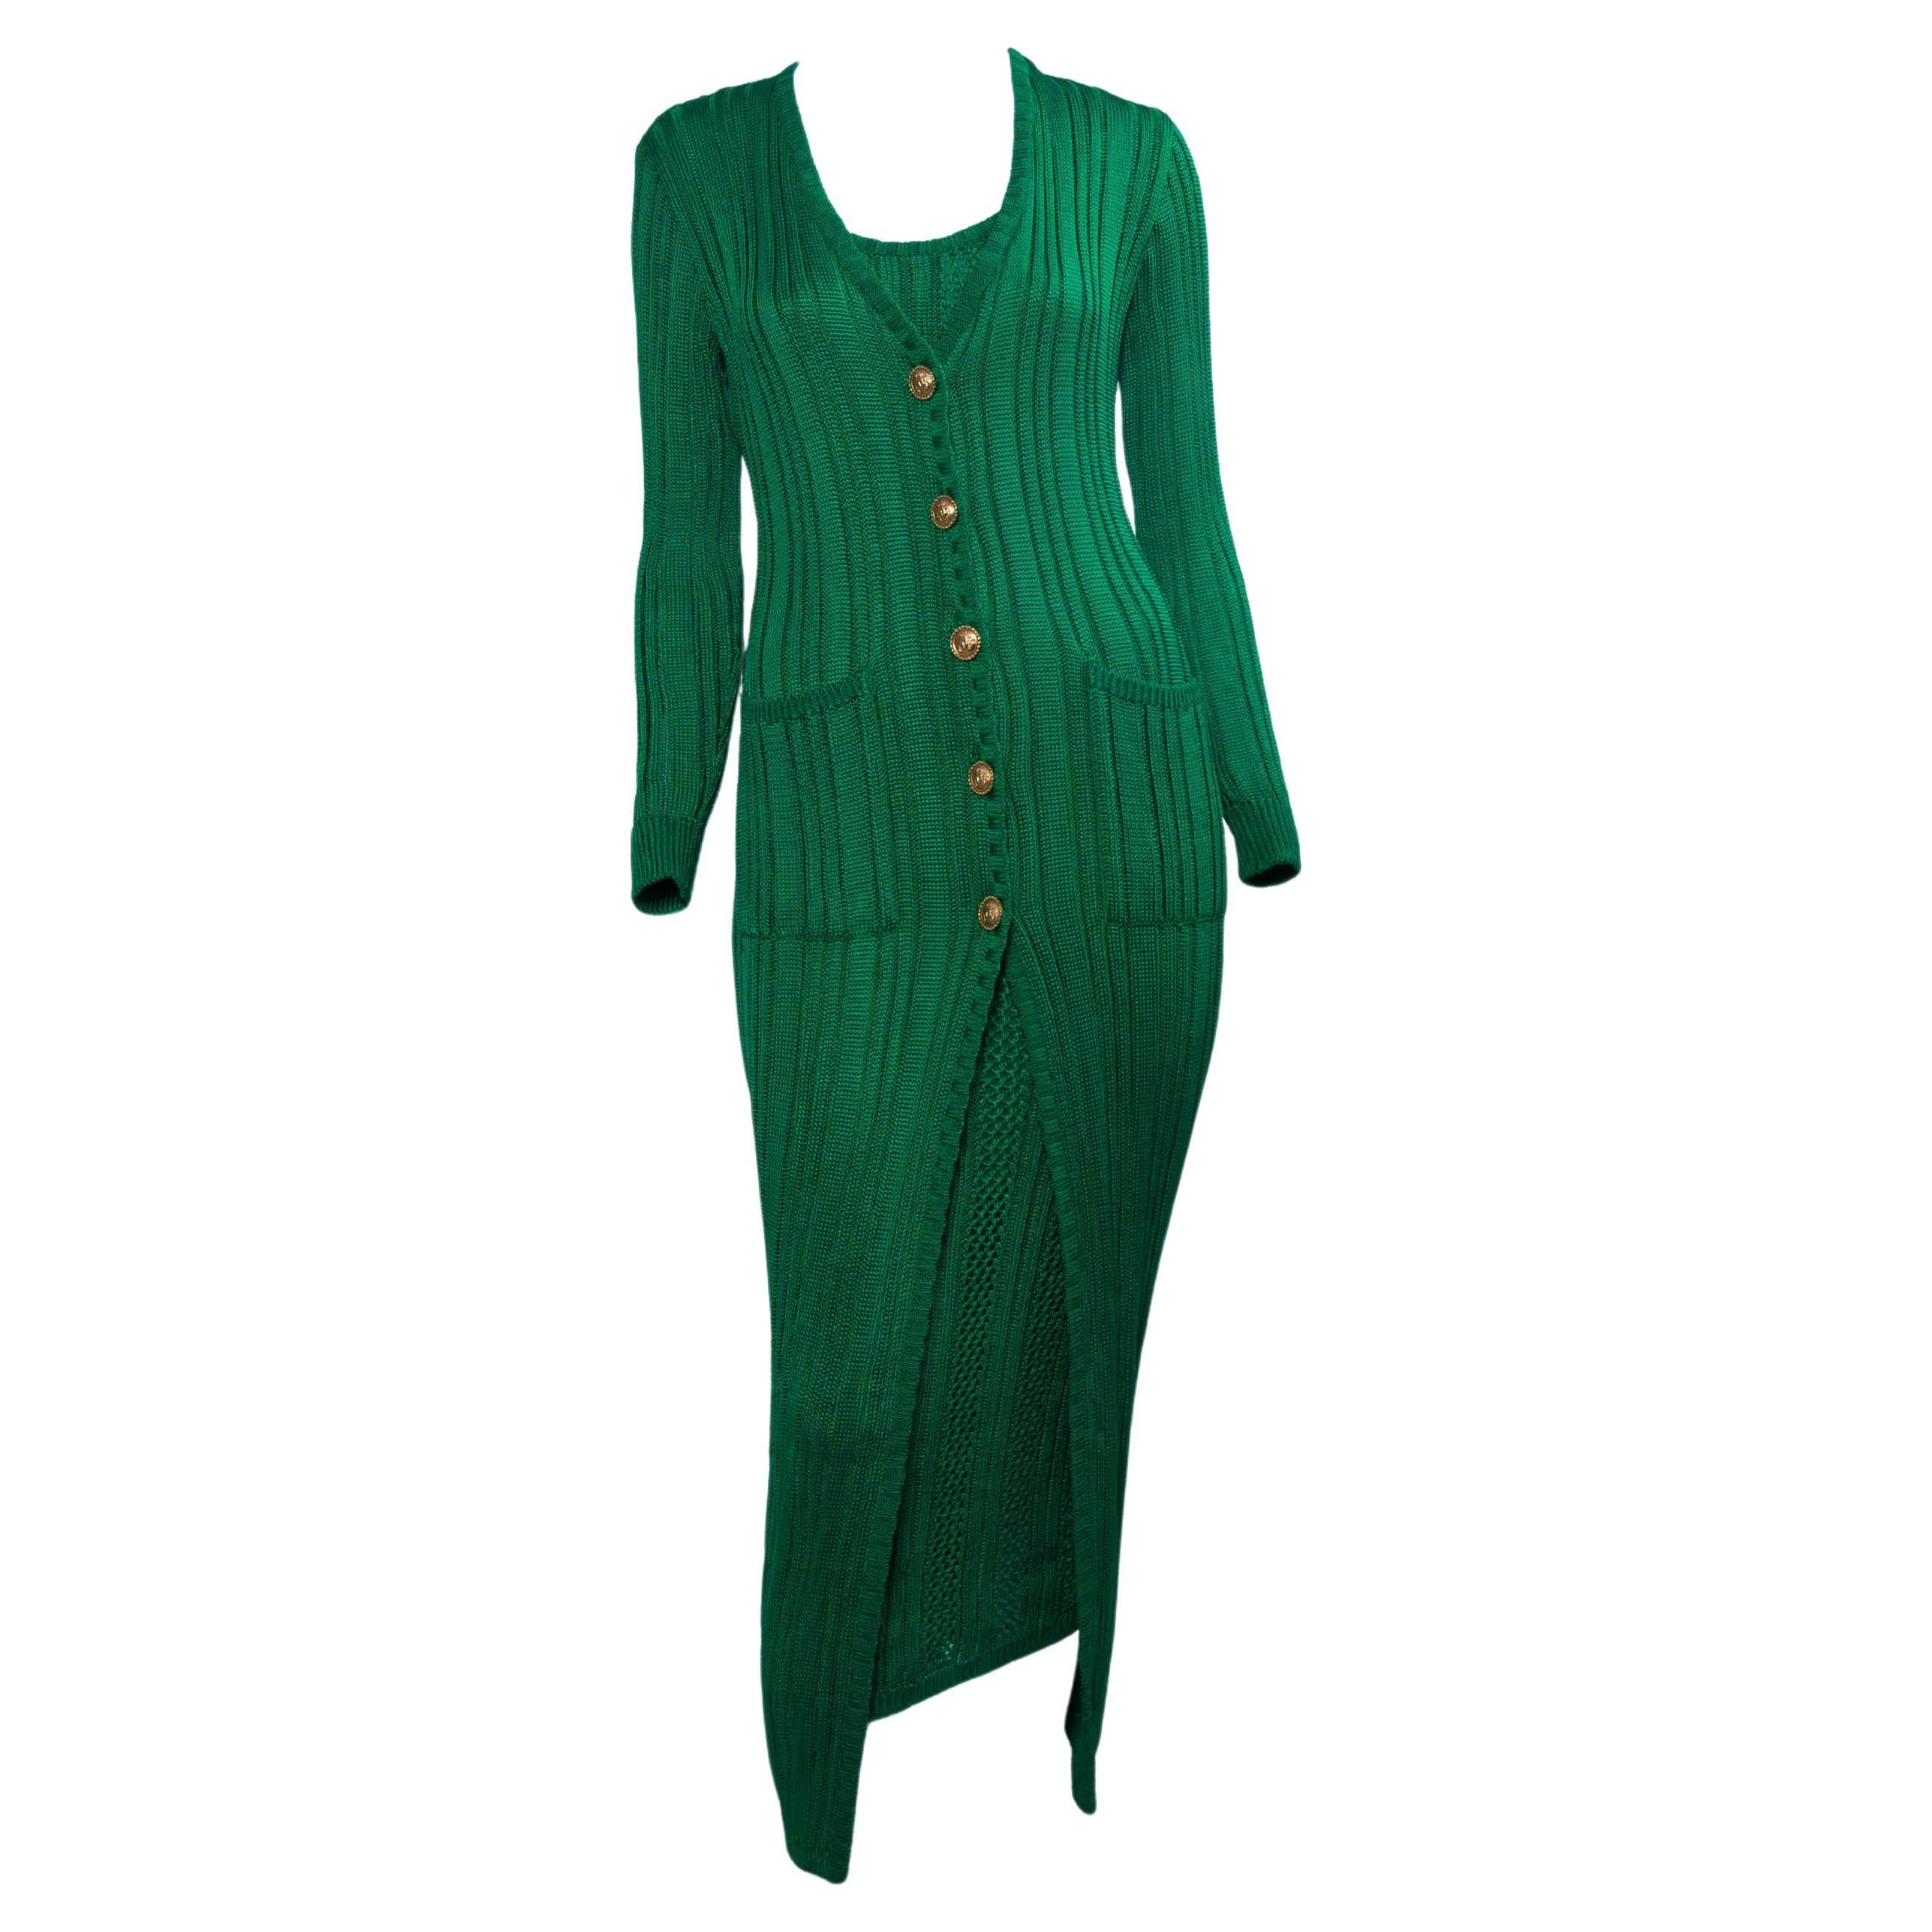 F/W 1993 Gianni Versace Couture - Robe en maille verte + Cardigan à boutons Medusa